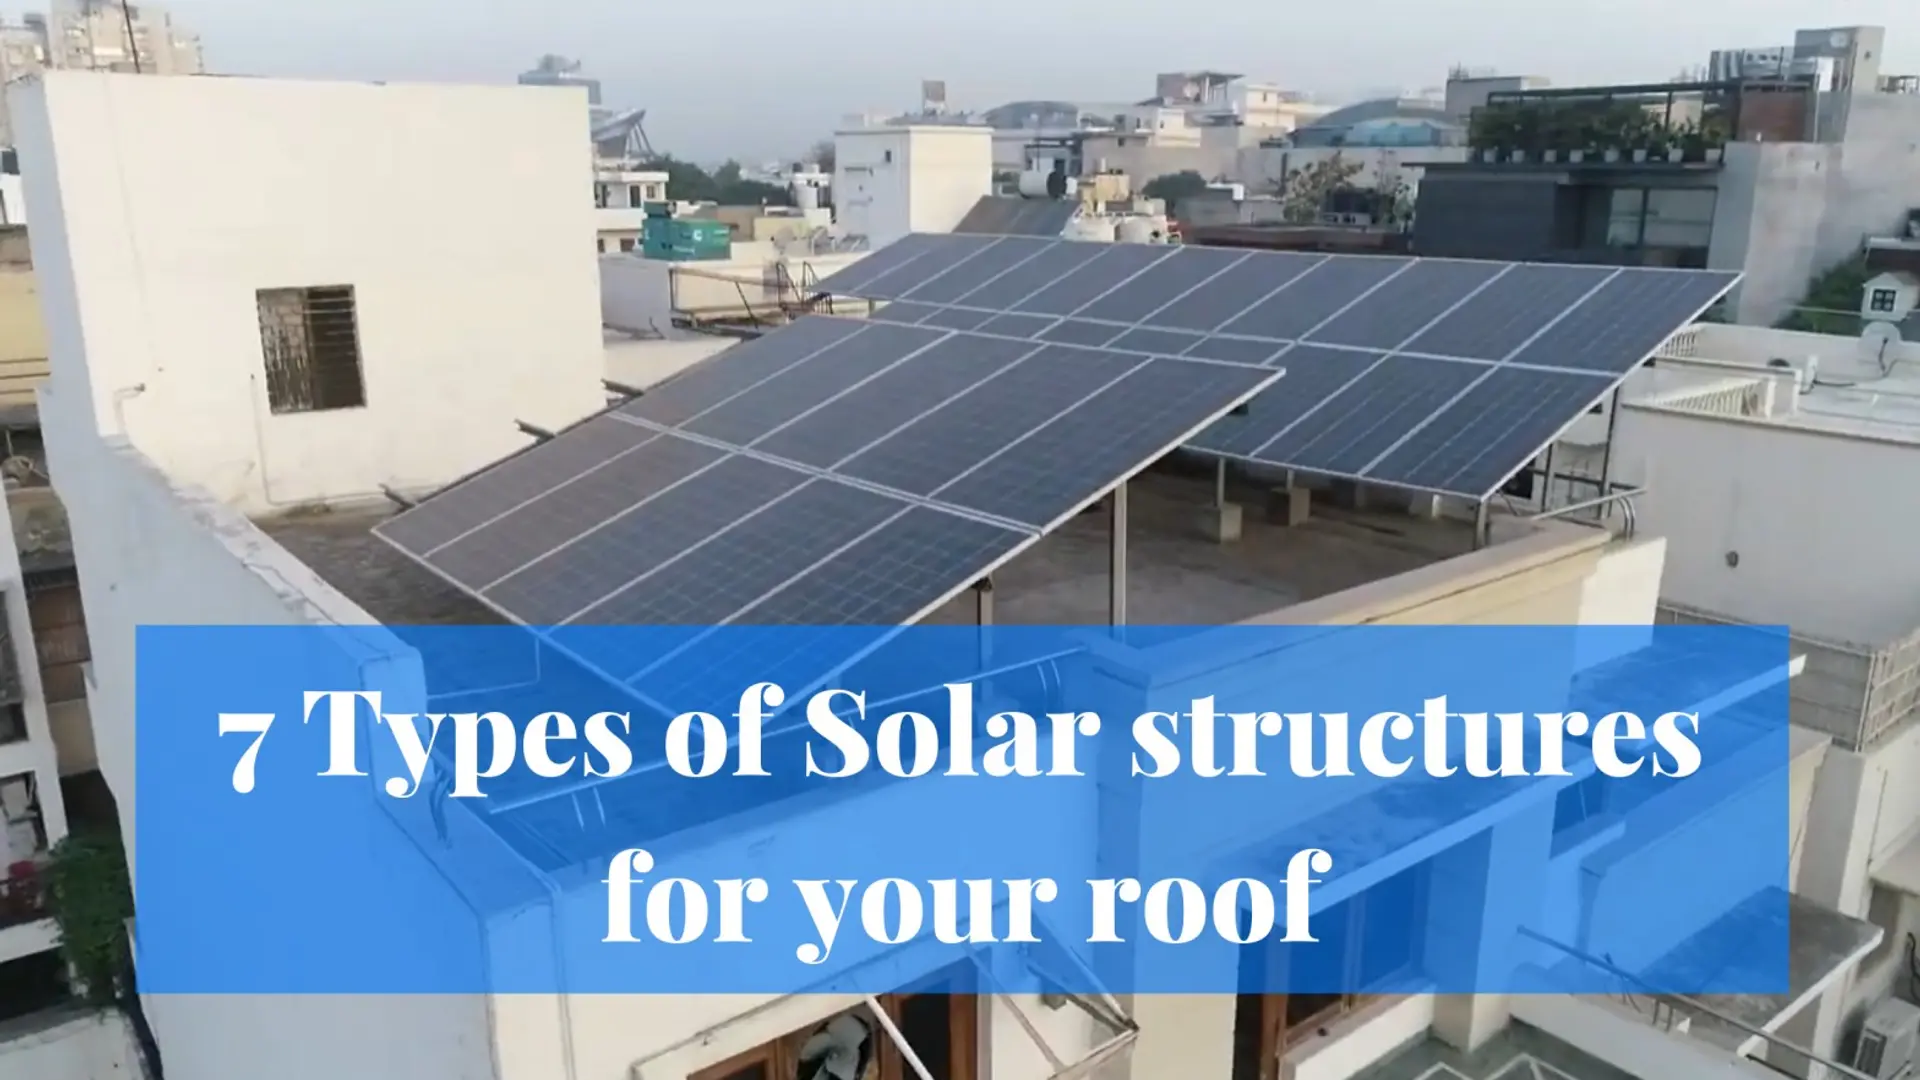 7 Types of Solar structures for your roof